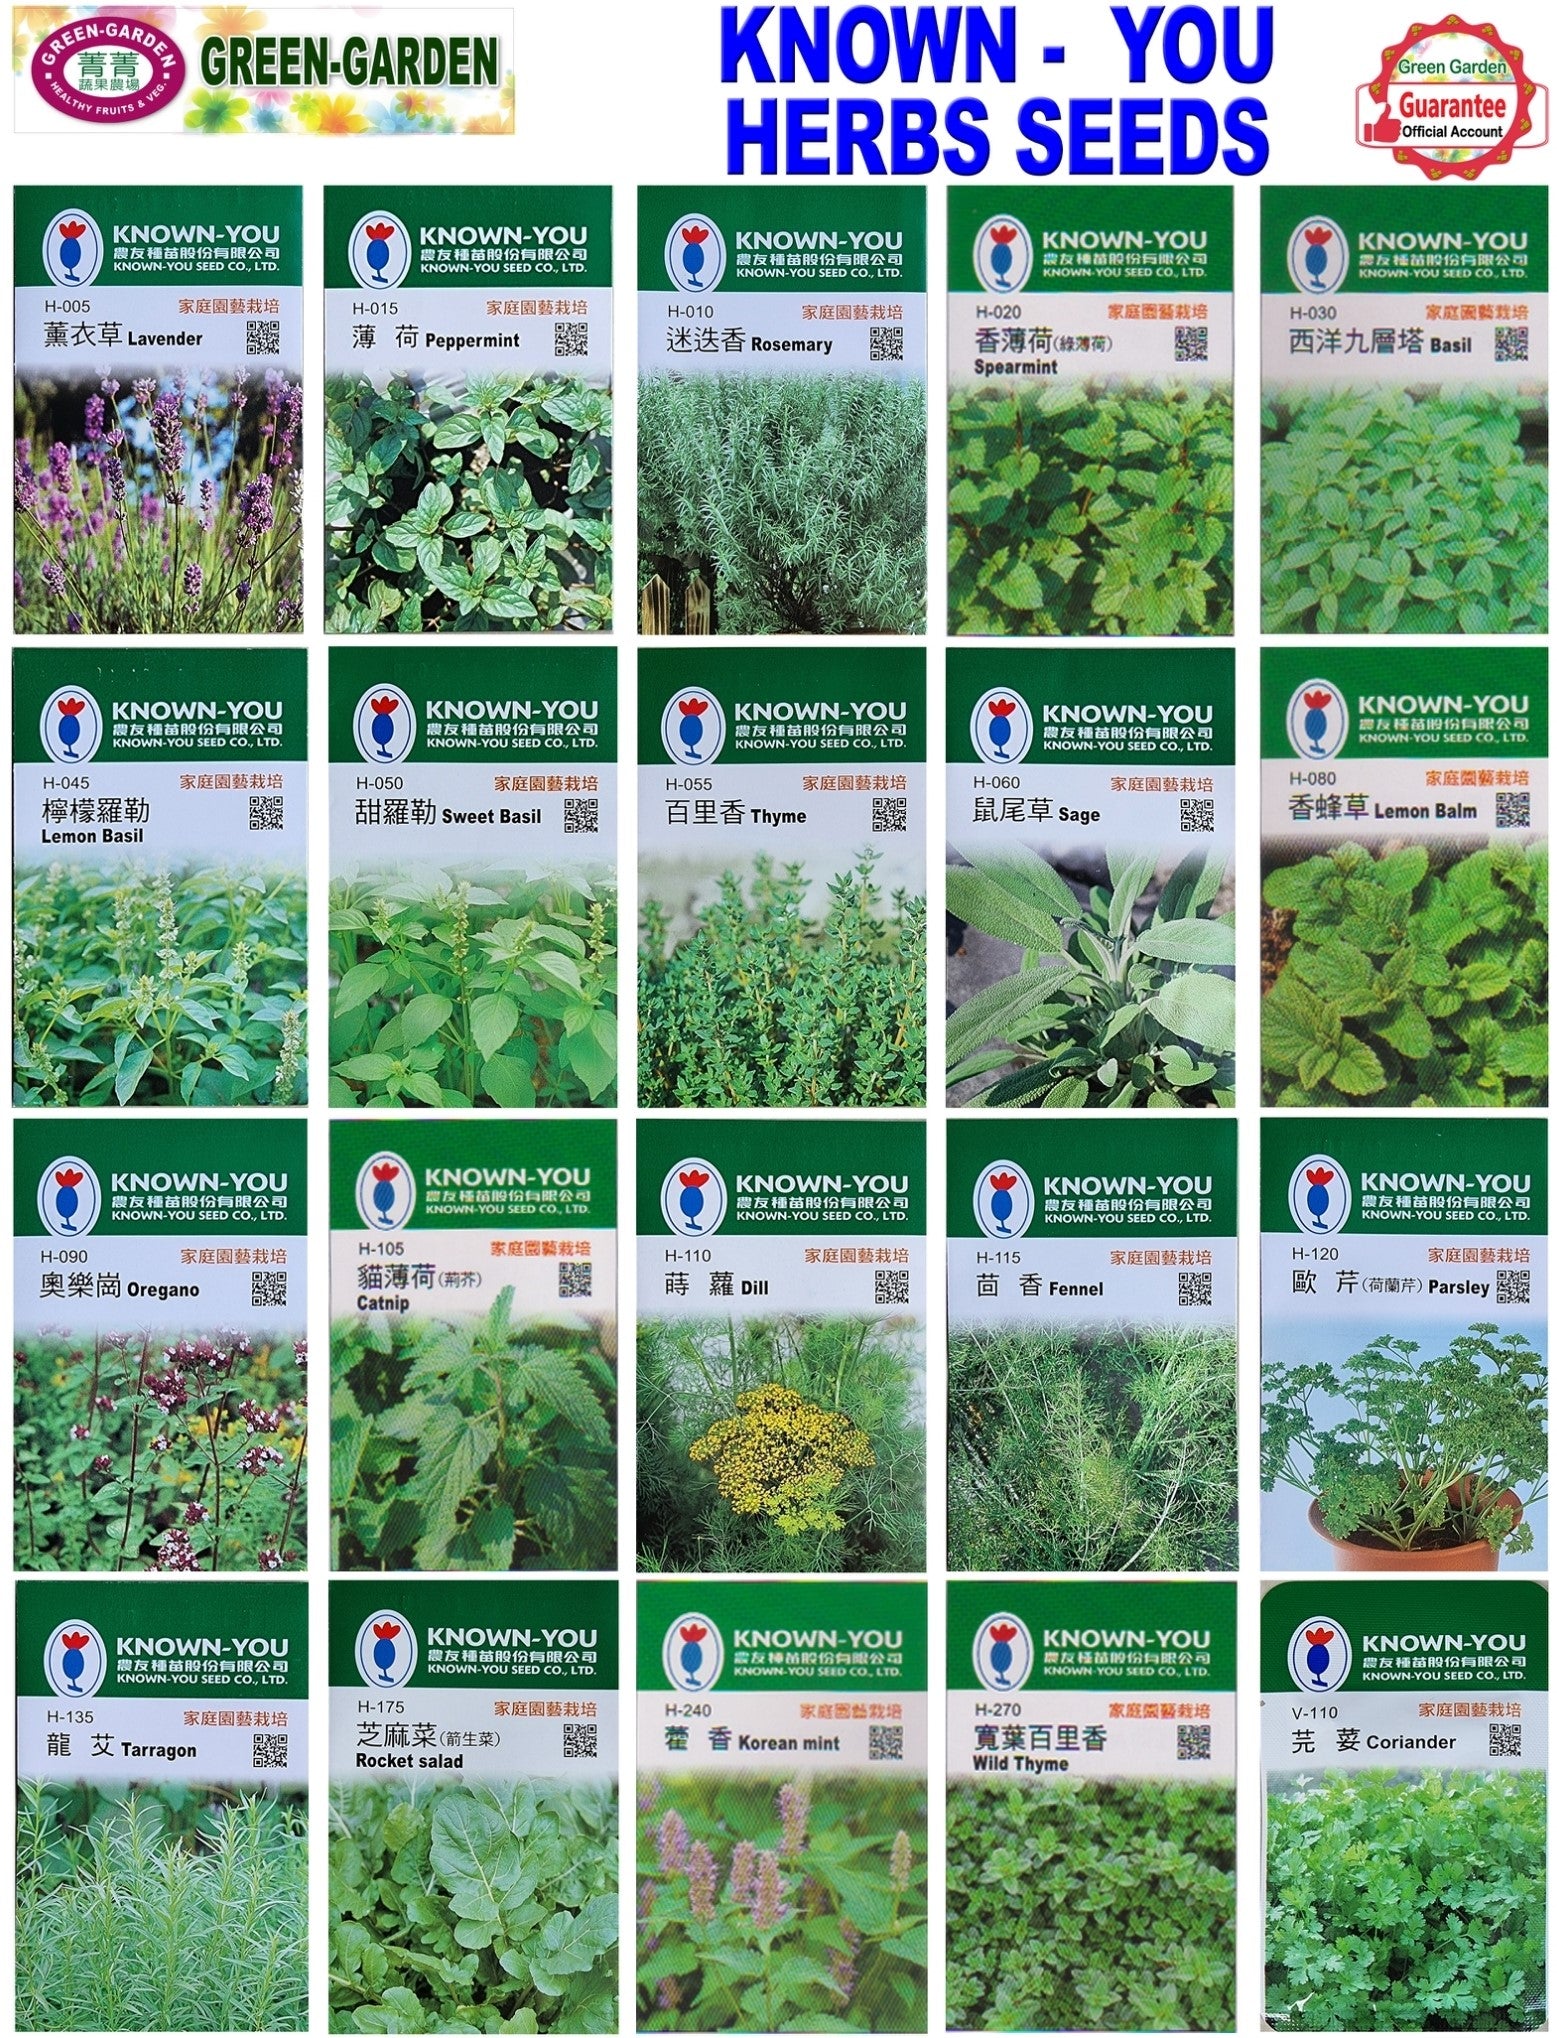 Known You Herbs Seeds (H-015 Peppermint)